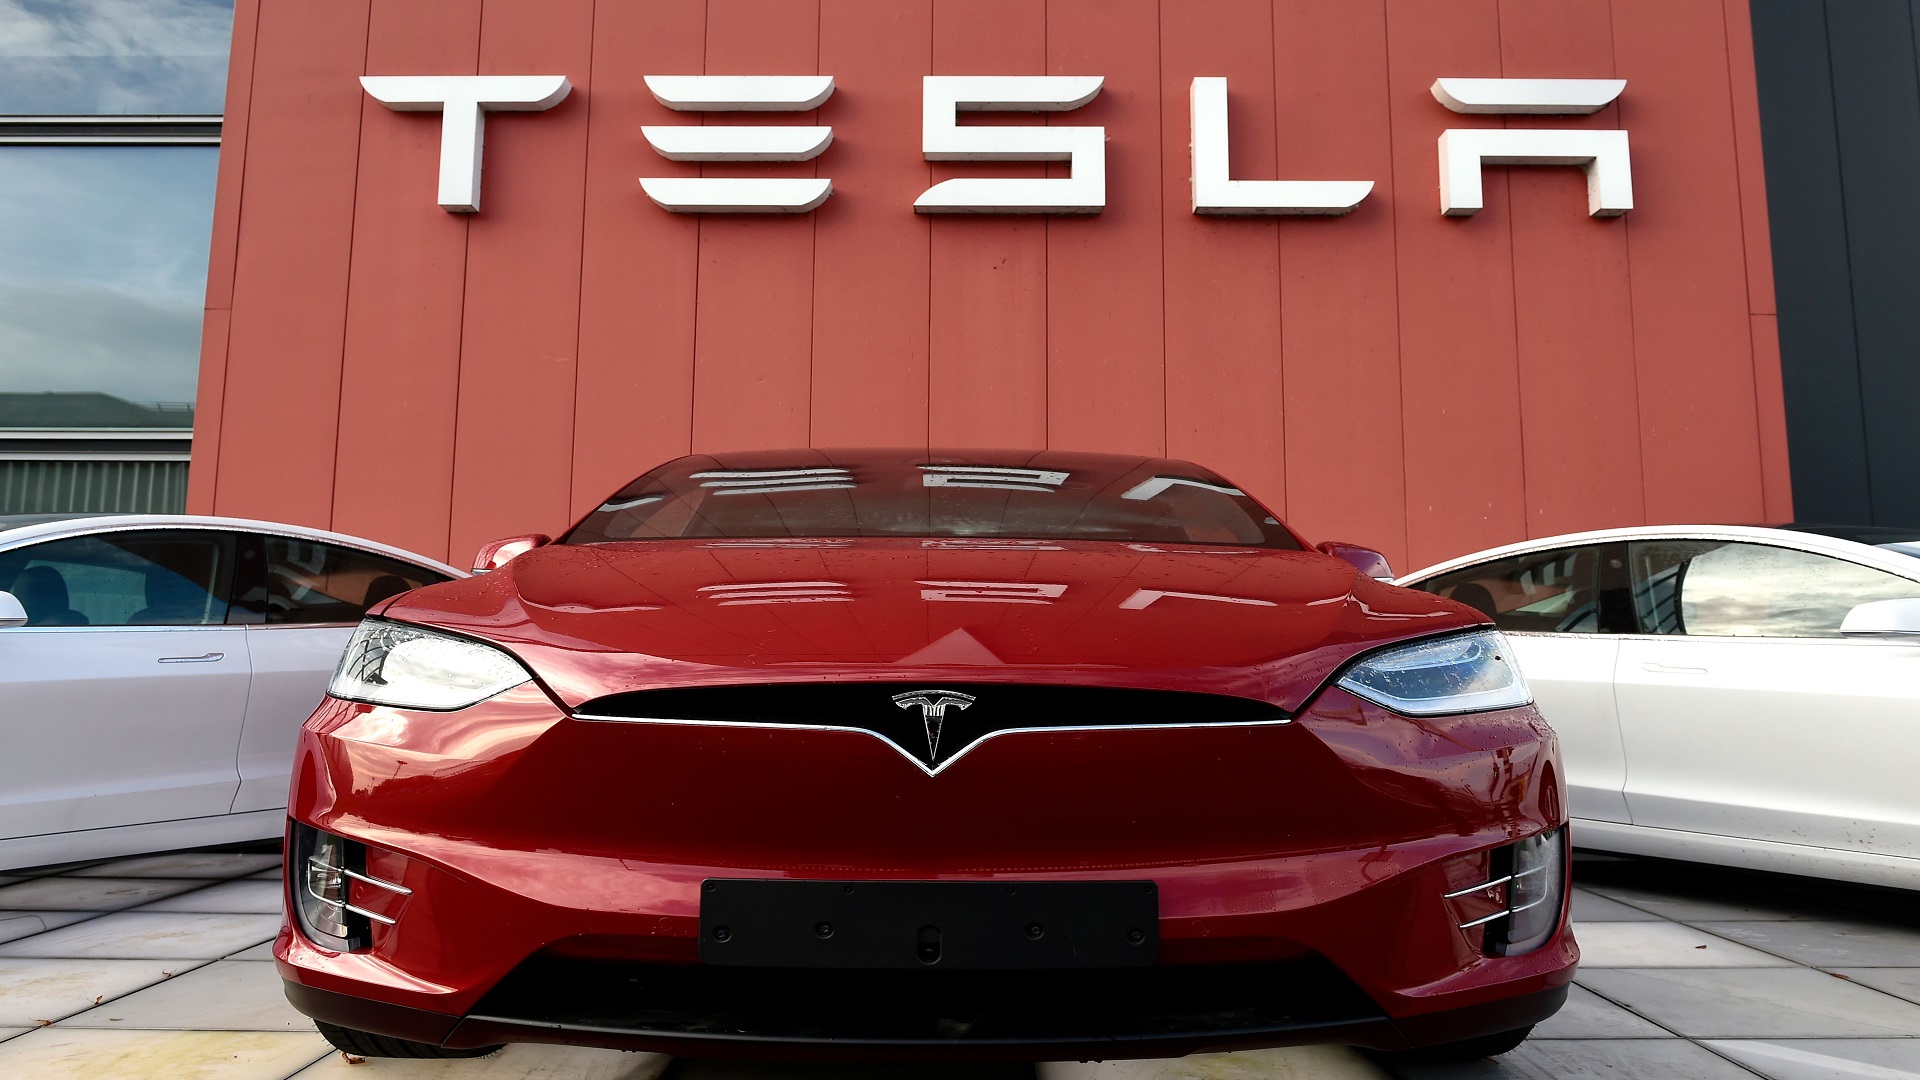 Tesla has dropped seven places in the annual rankings of consumer reports